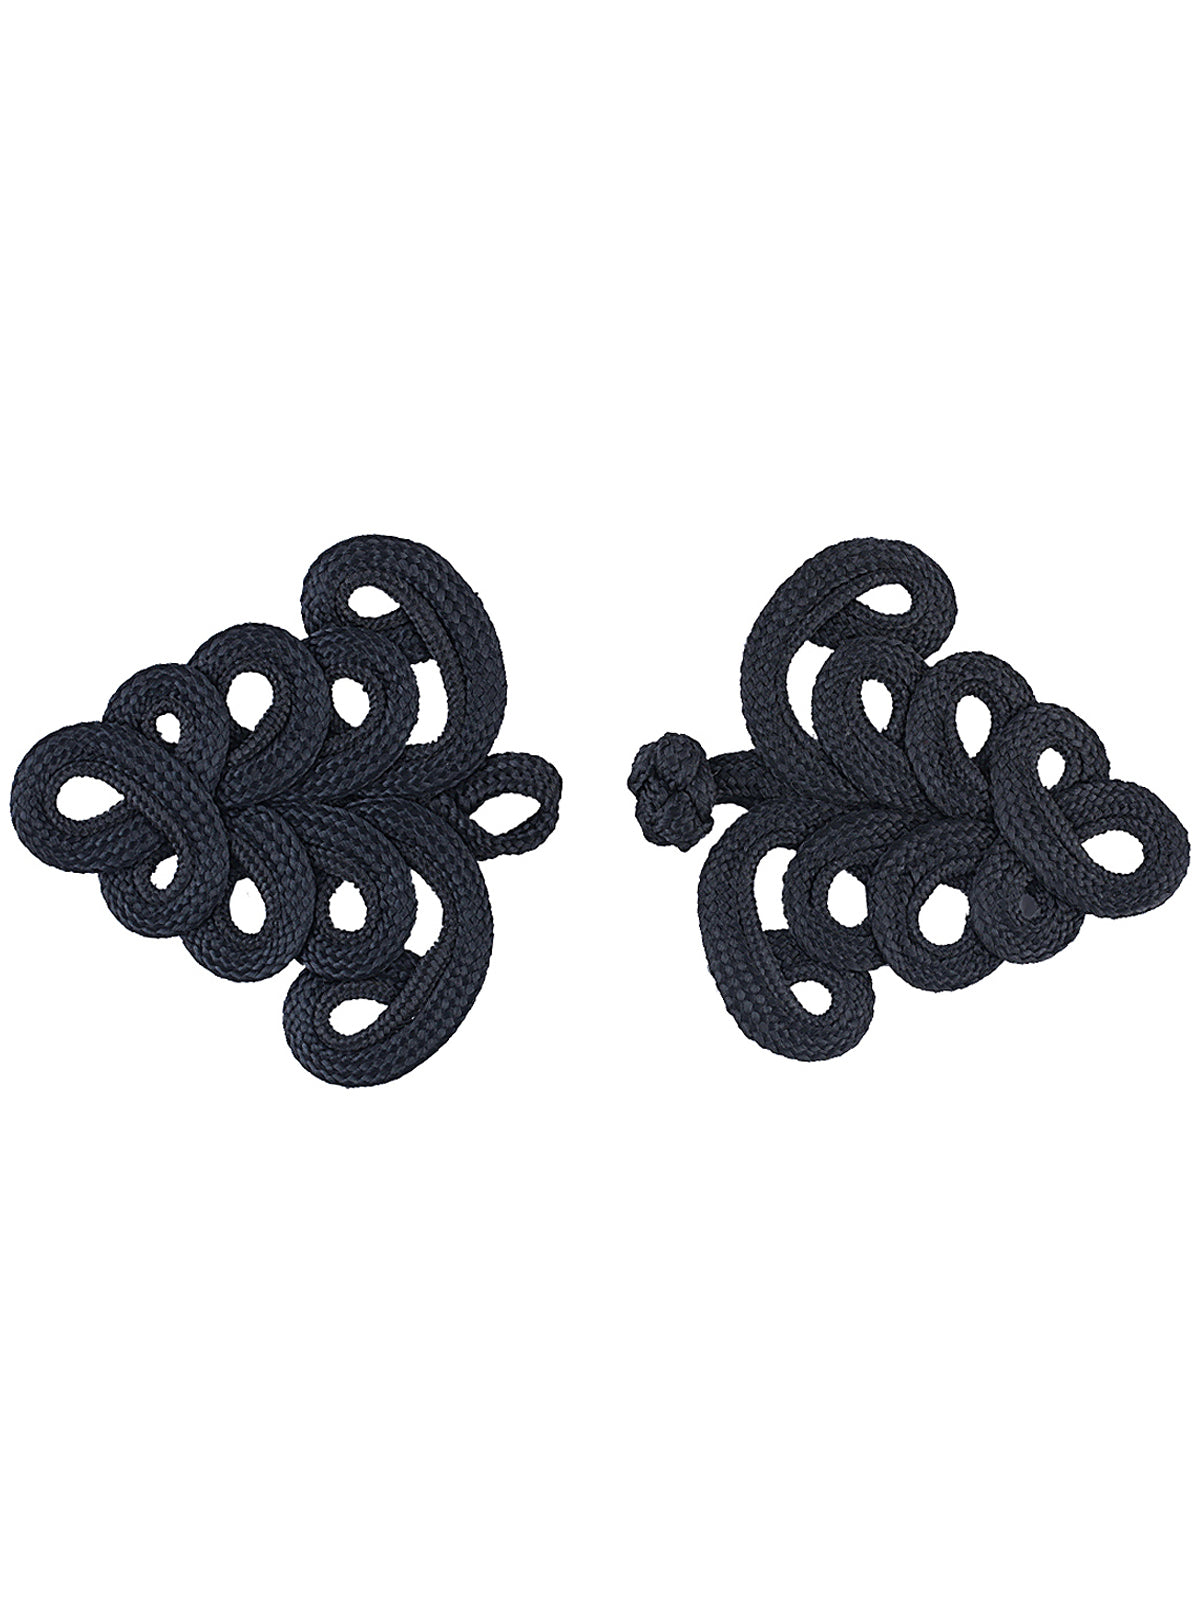 Black Braided Loopy Frog Knot Closure